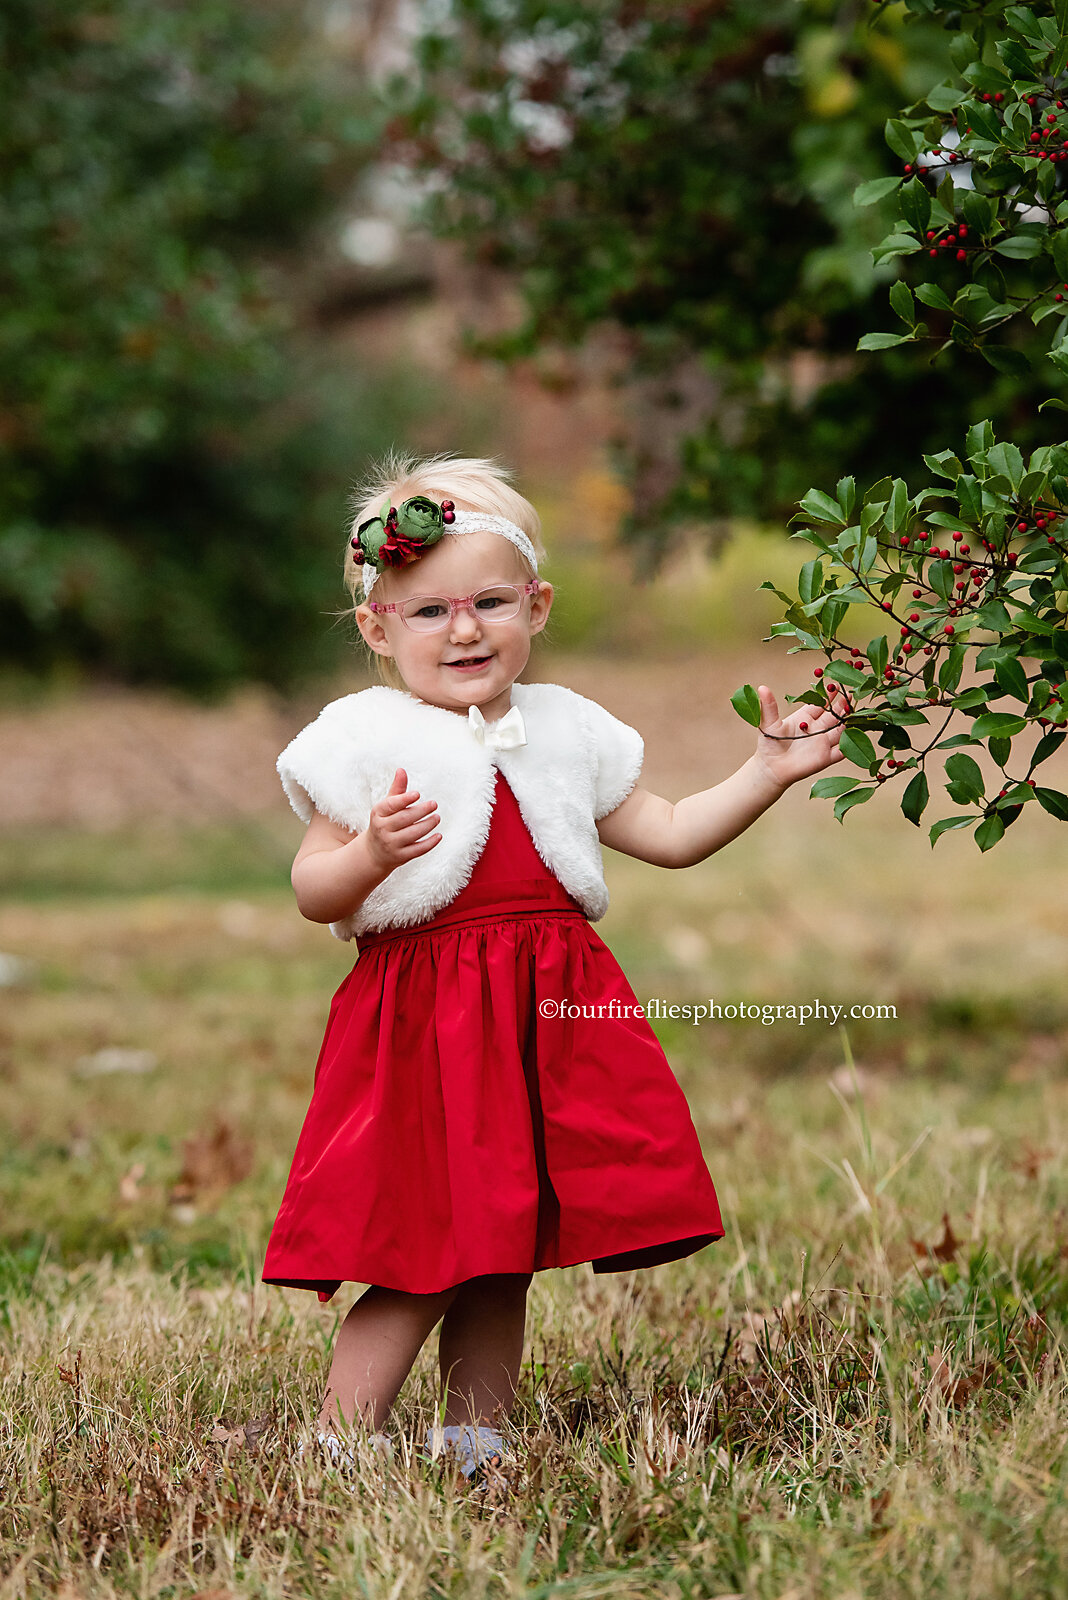 st-louis-family-photographer-holiday-mini-sessions-toddler-girl-in-red-dress-with-fur-standing-with-evergreen-trees-and-berries-forest-park-st-louis.jpg